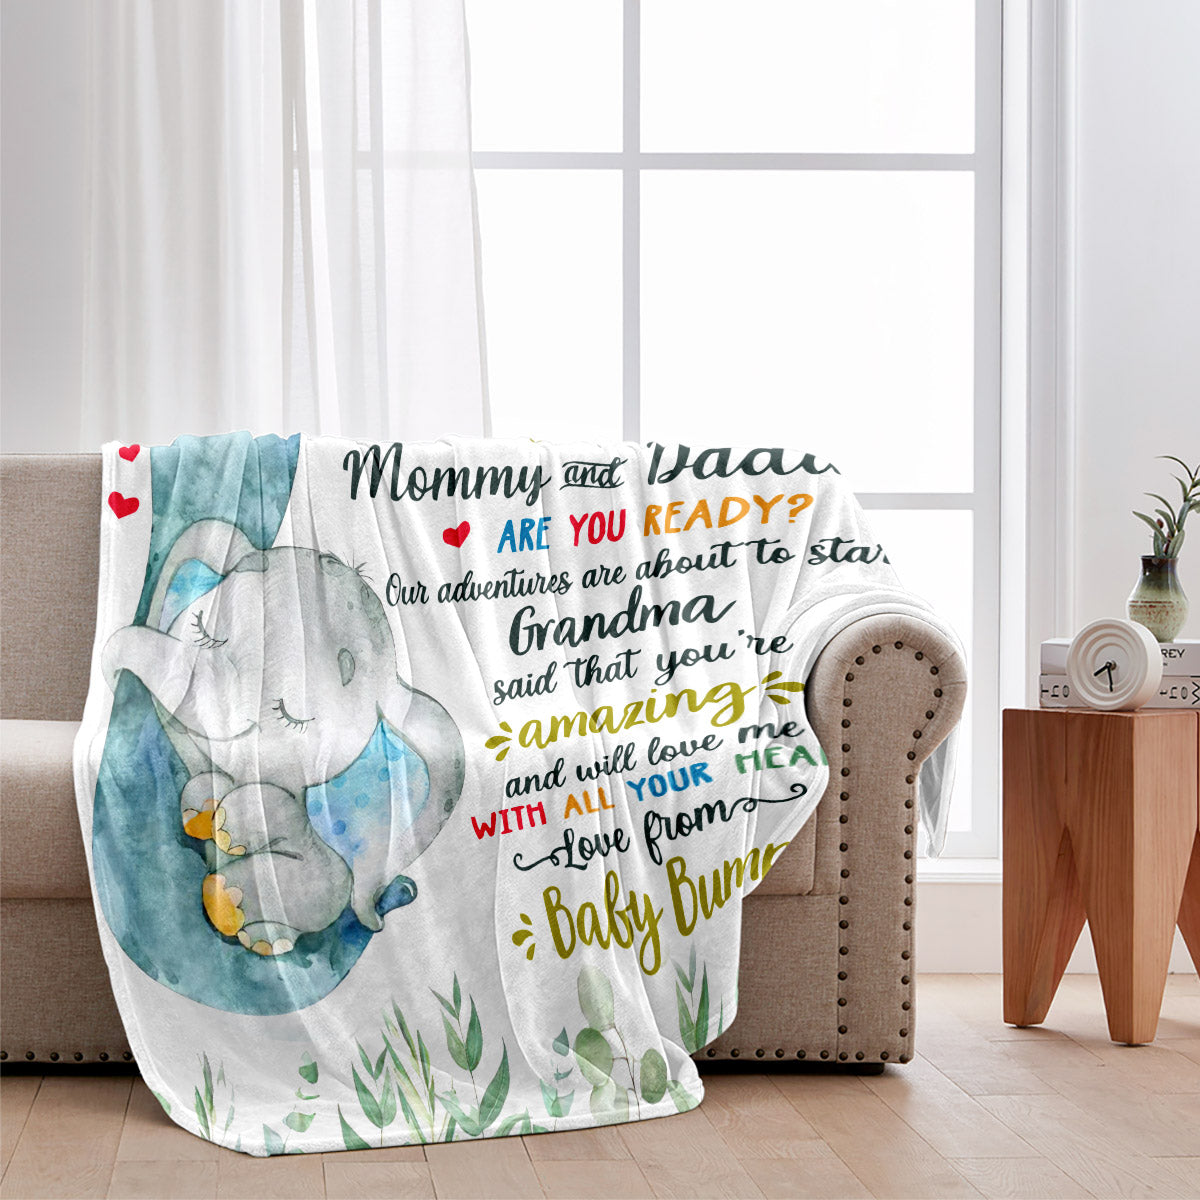 Love From Baby Bump - Personalized Mother's Day Pregnancy New Mom Blanket